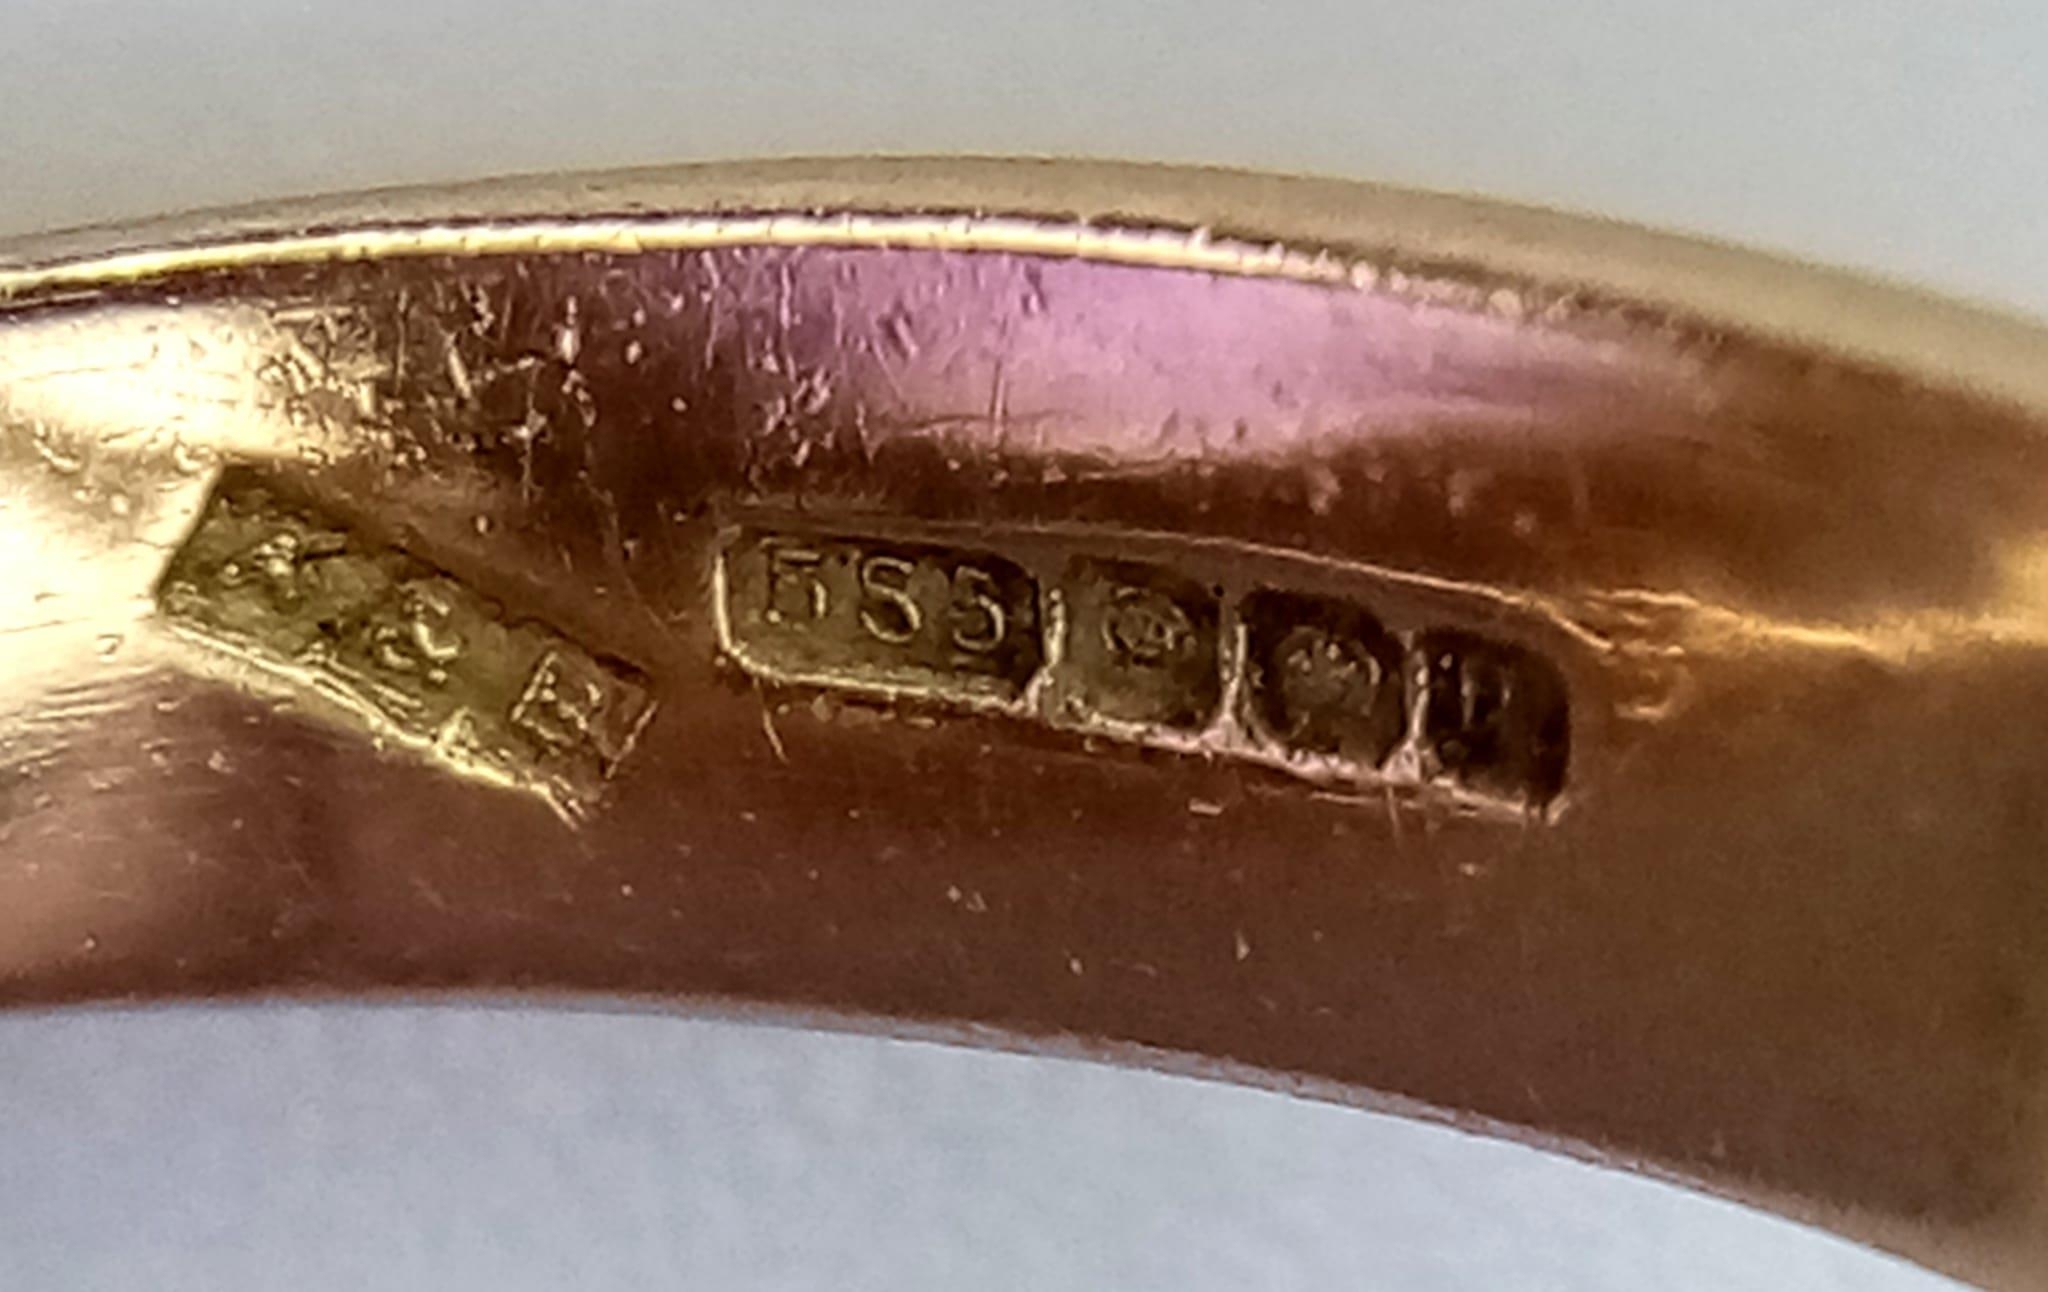 AN 18K YELLOW GOLD DIAMOND & PURPLE STONE ( BELIEVED TO BE AMETHYST ) COCKTAIL RING, WITH A LARGE - Image 6 of 6